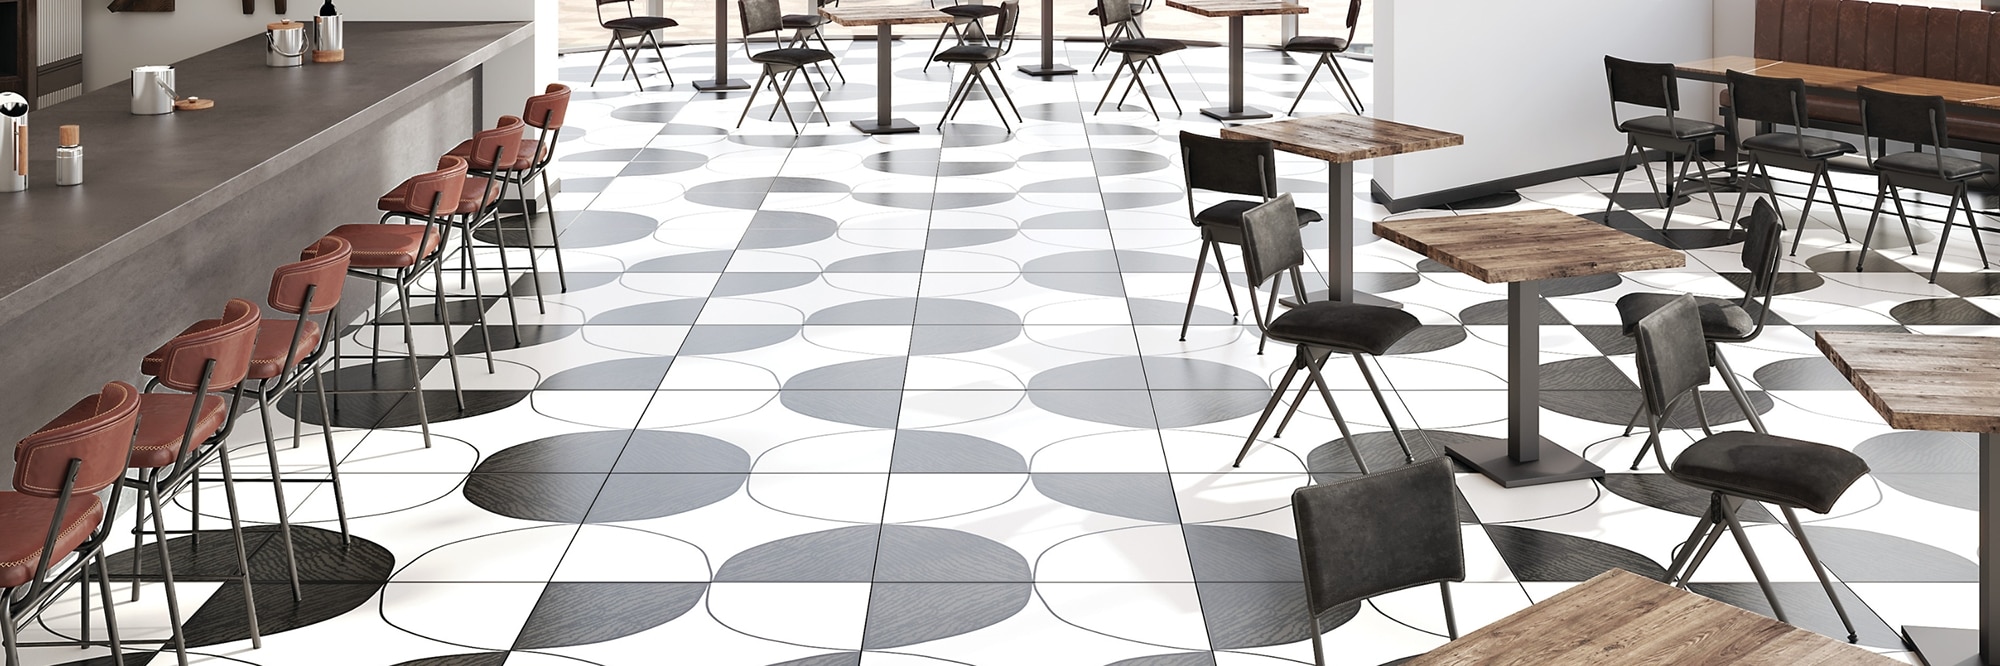 Restaurant with white floor tile with black circles & designs, wood tables with black chairs, gray porcelain slab countertop with maroon chairs.